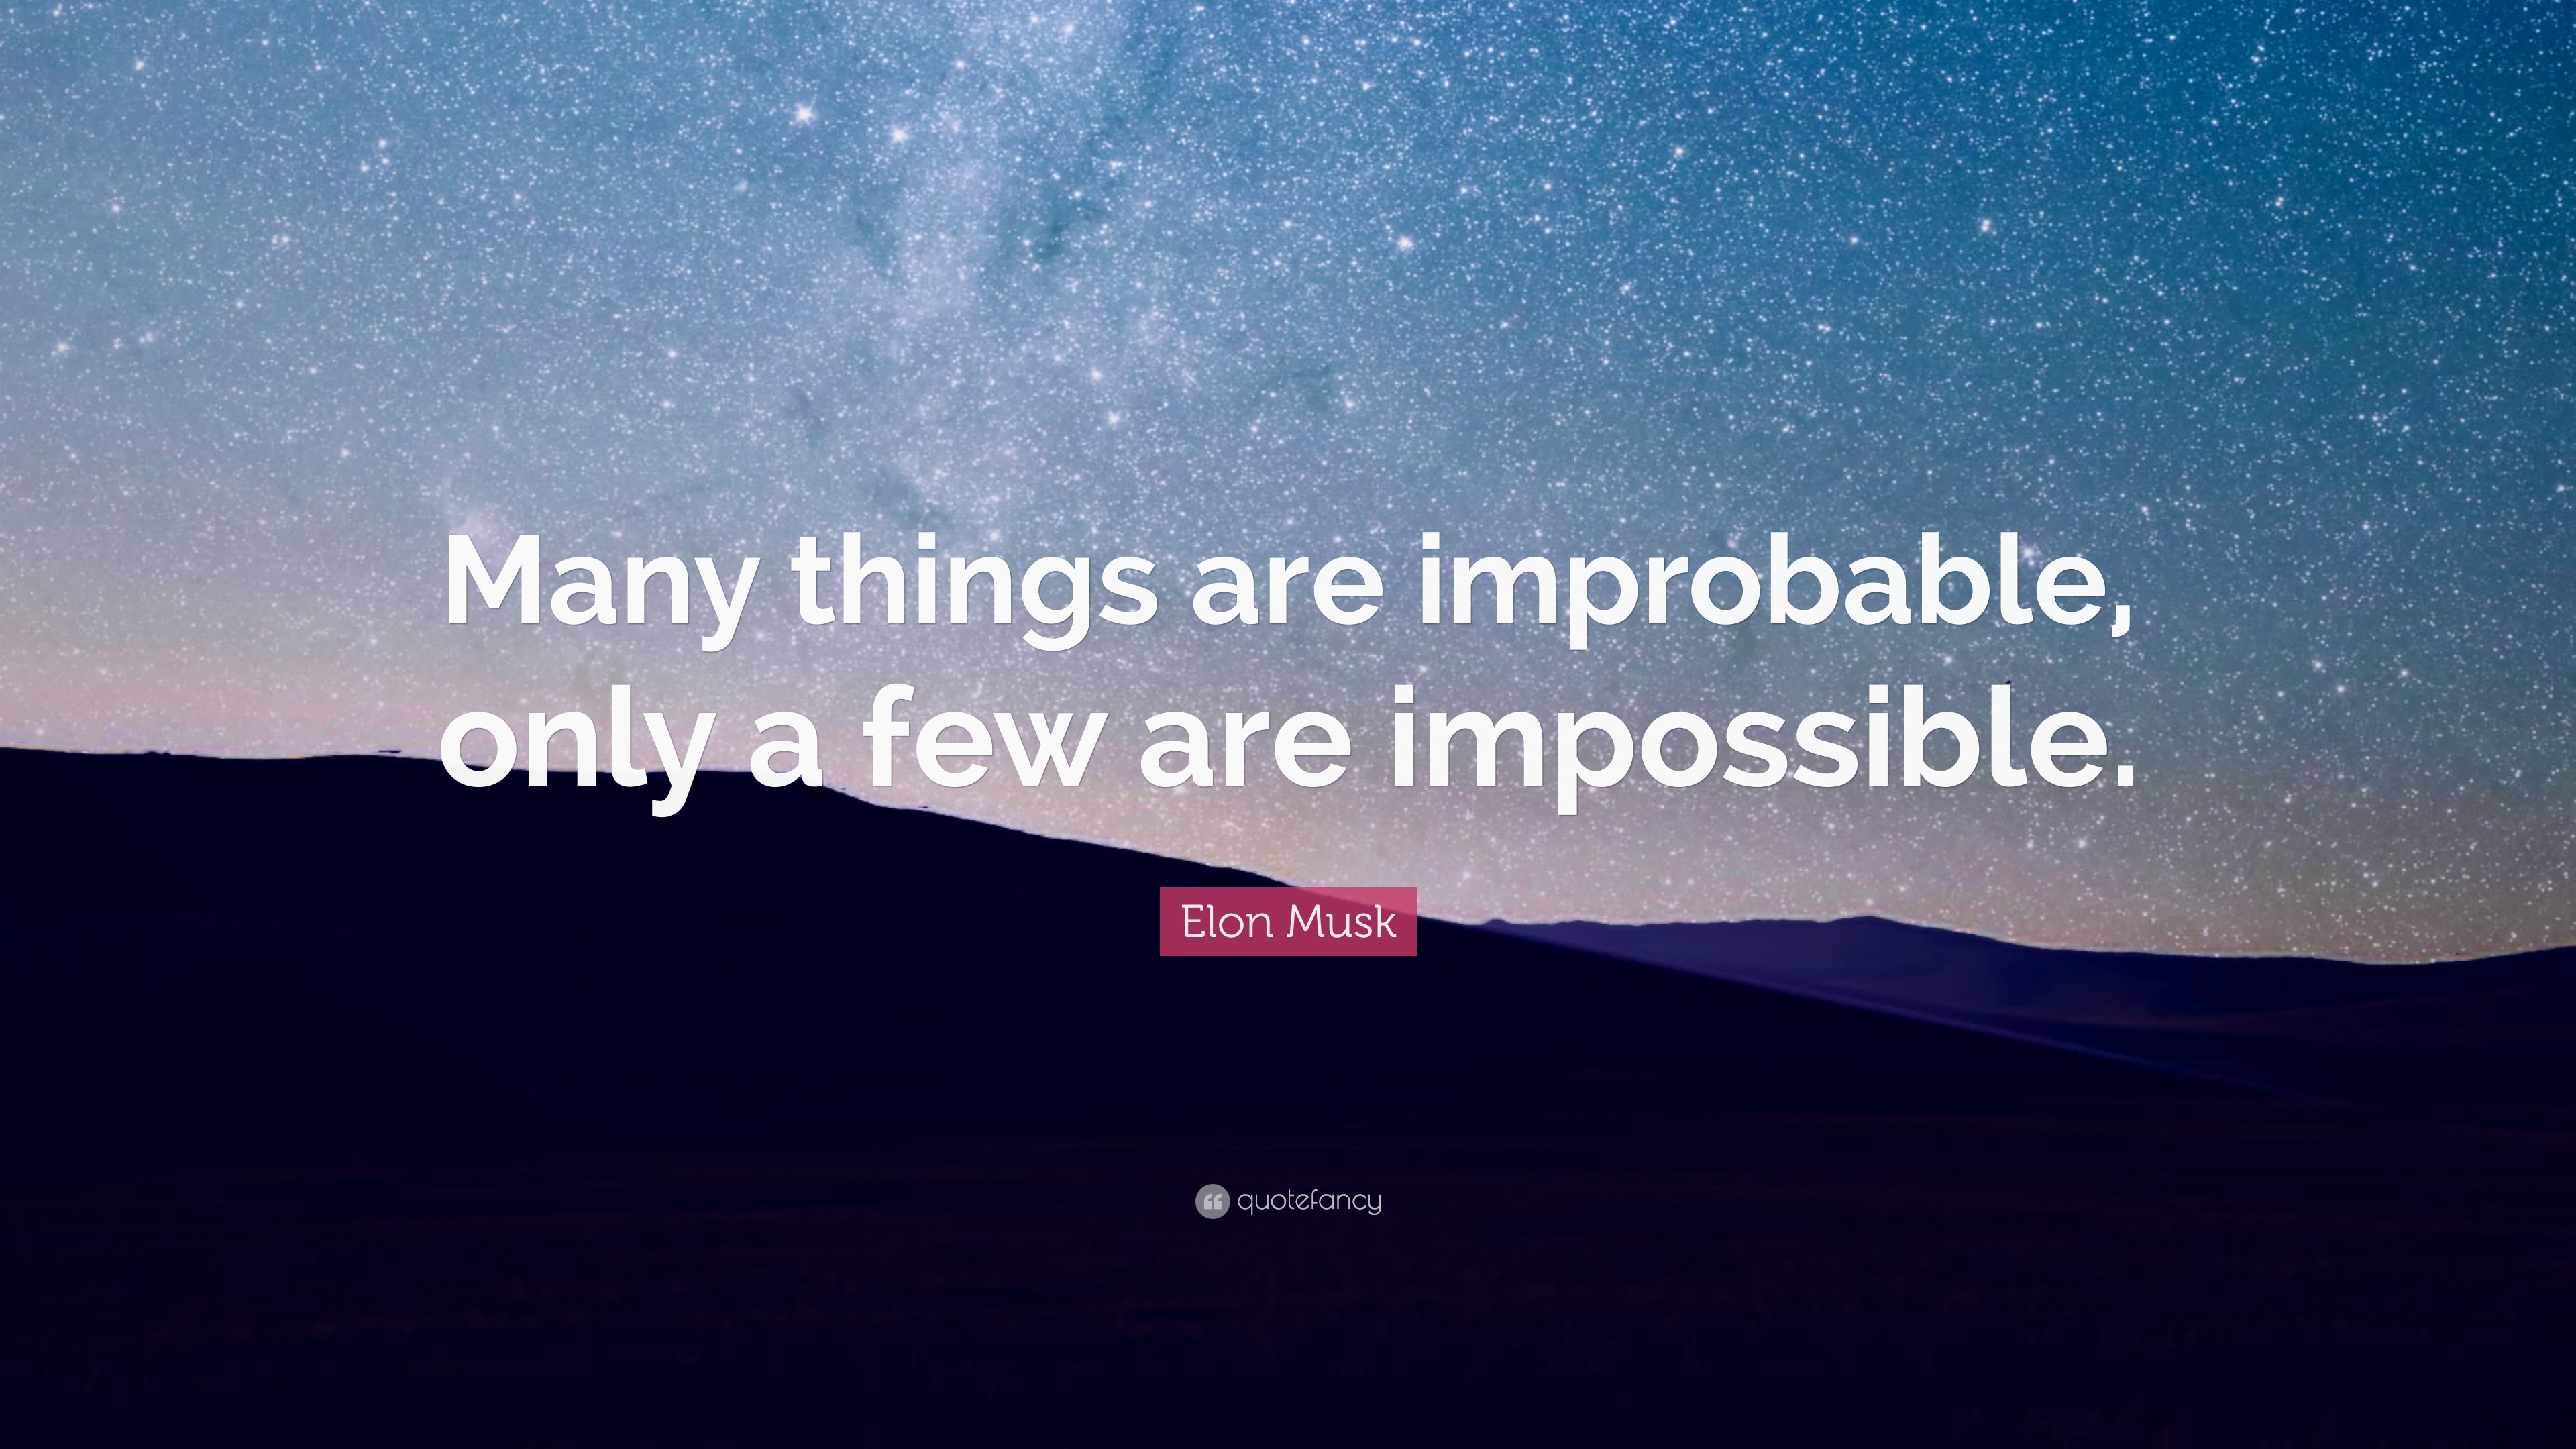 Elon Musk Quote Many things are improbable, only a few are impossible